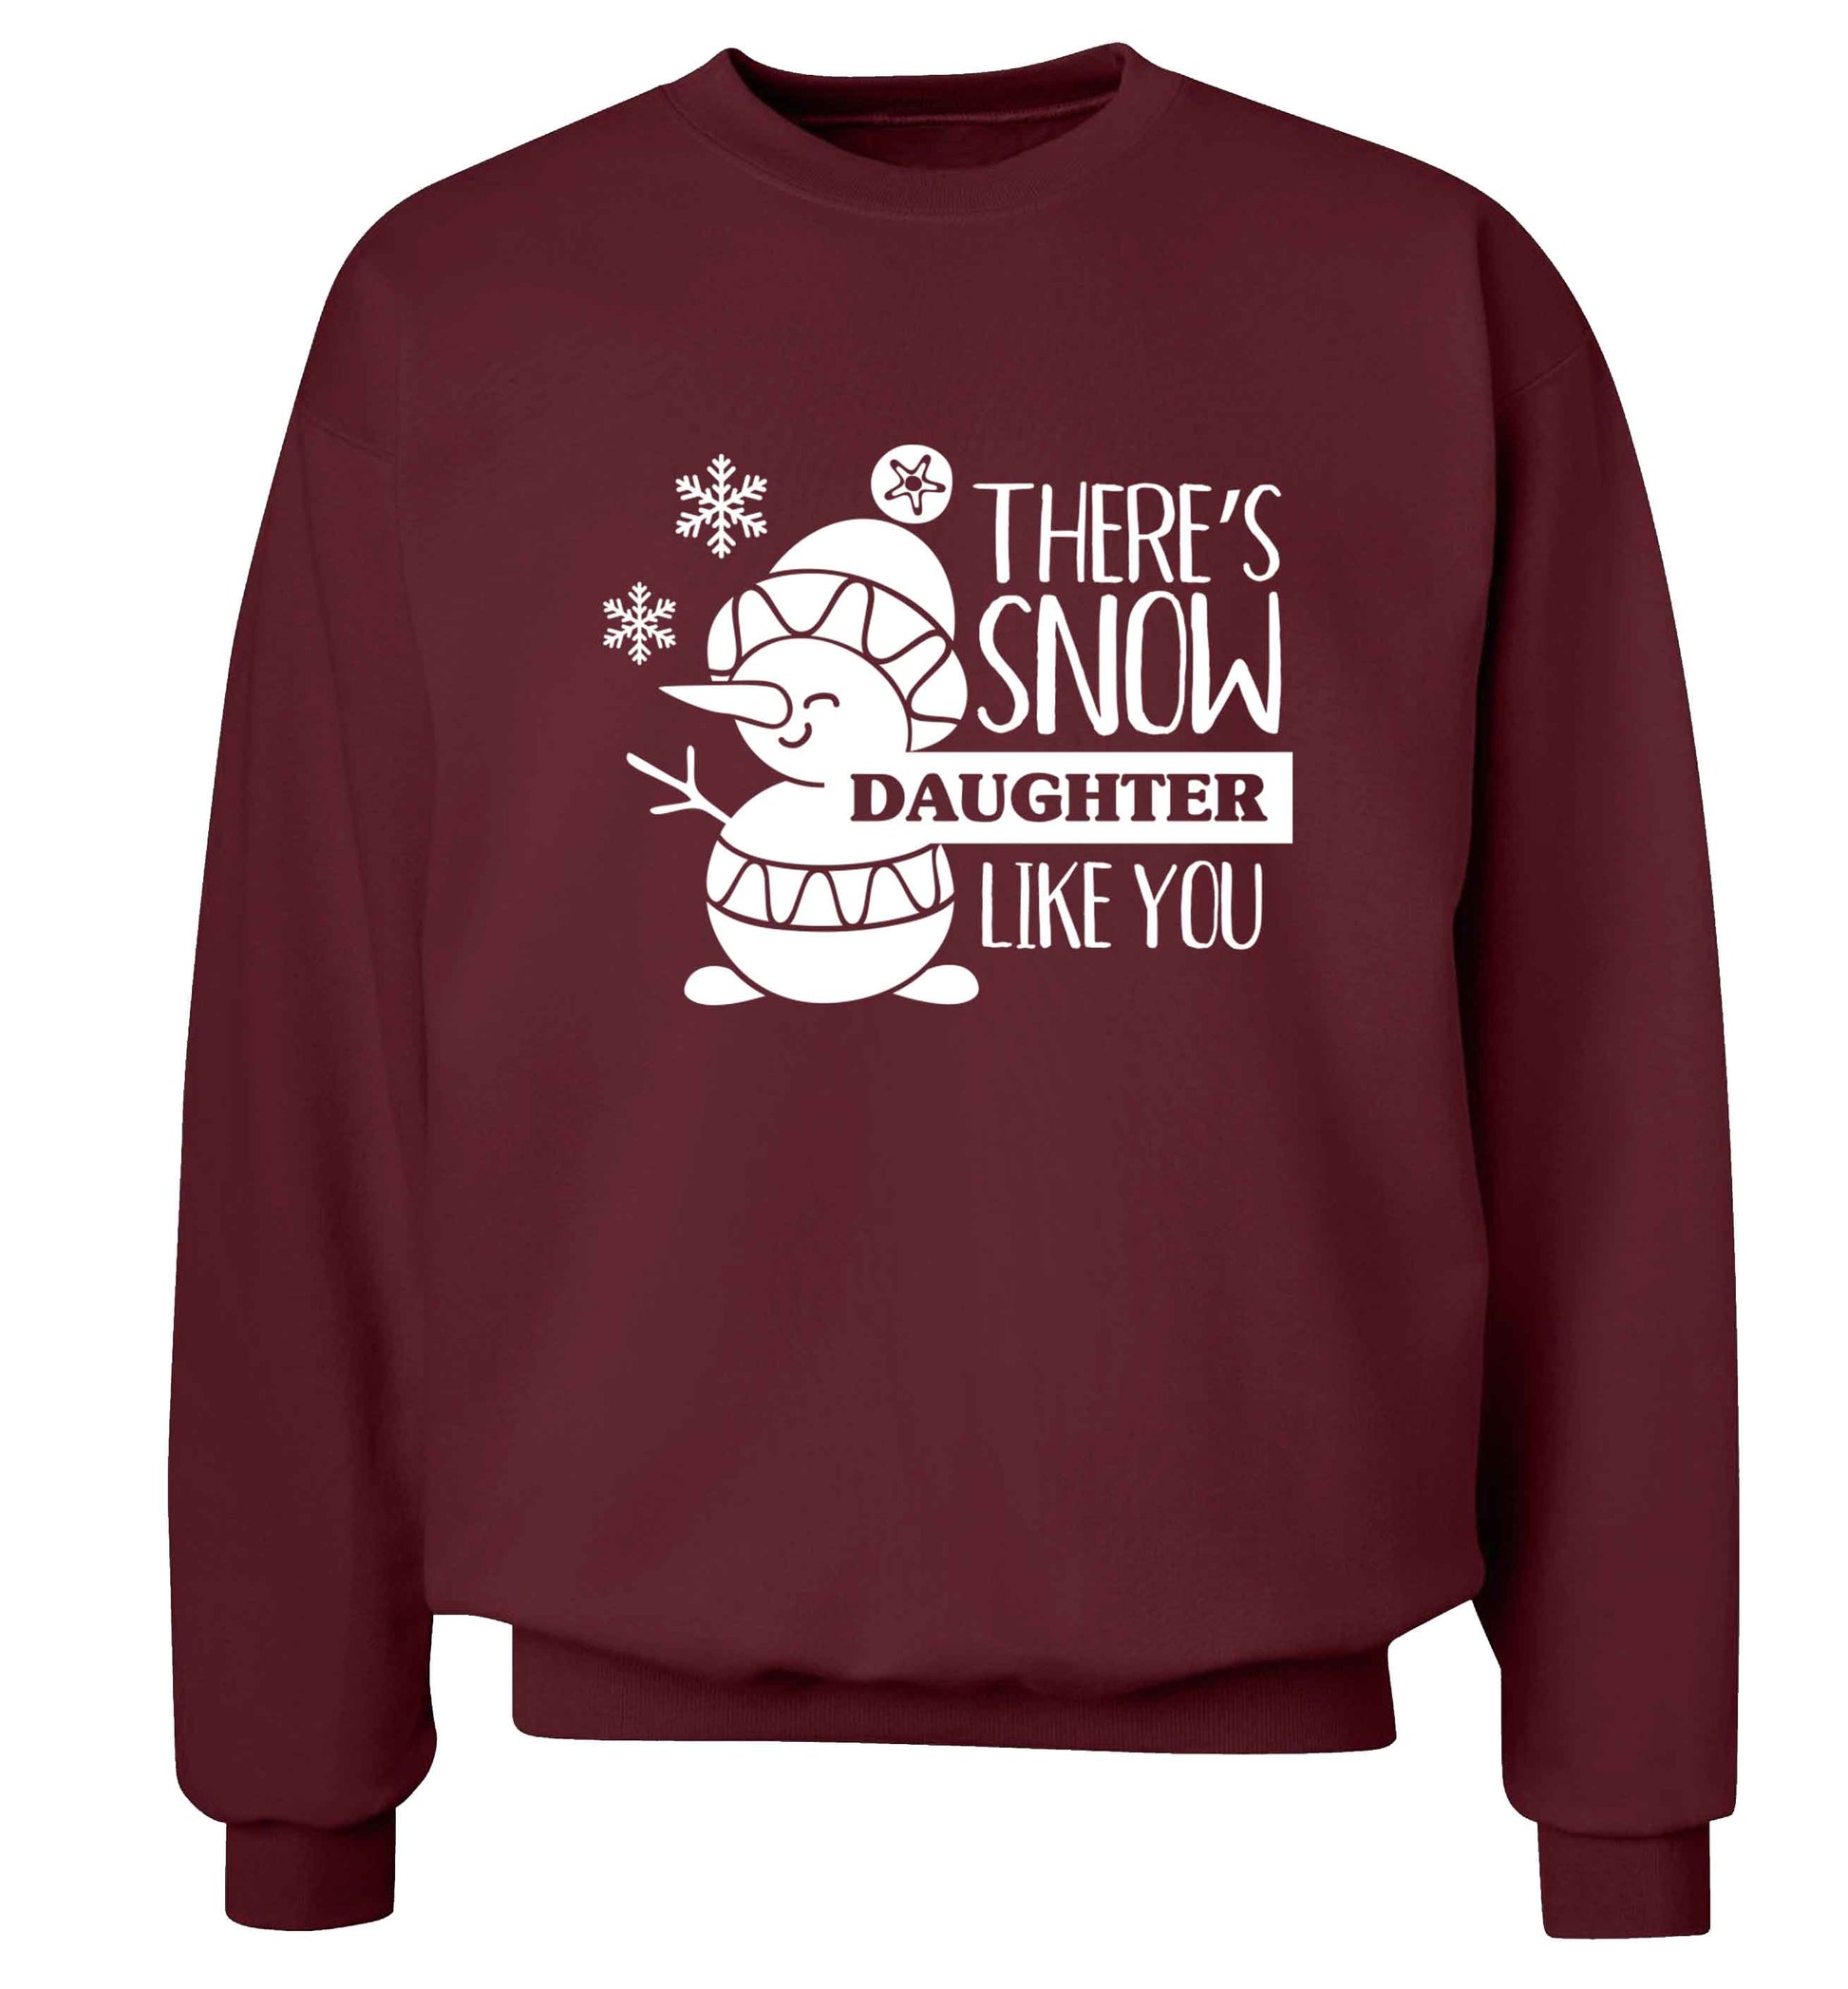 There's snow daughter like you adult's unisex maroon sweater 2XL